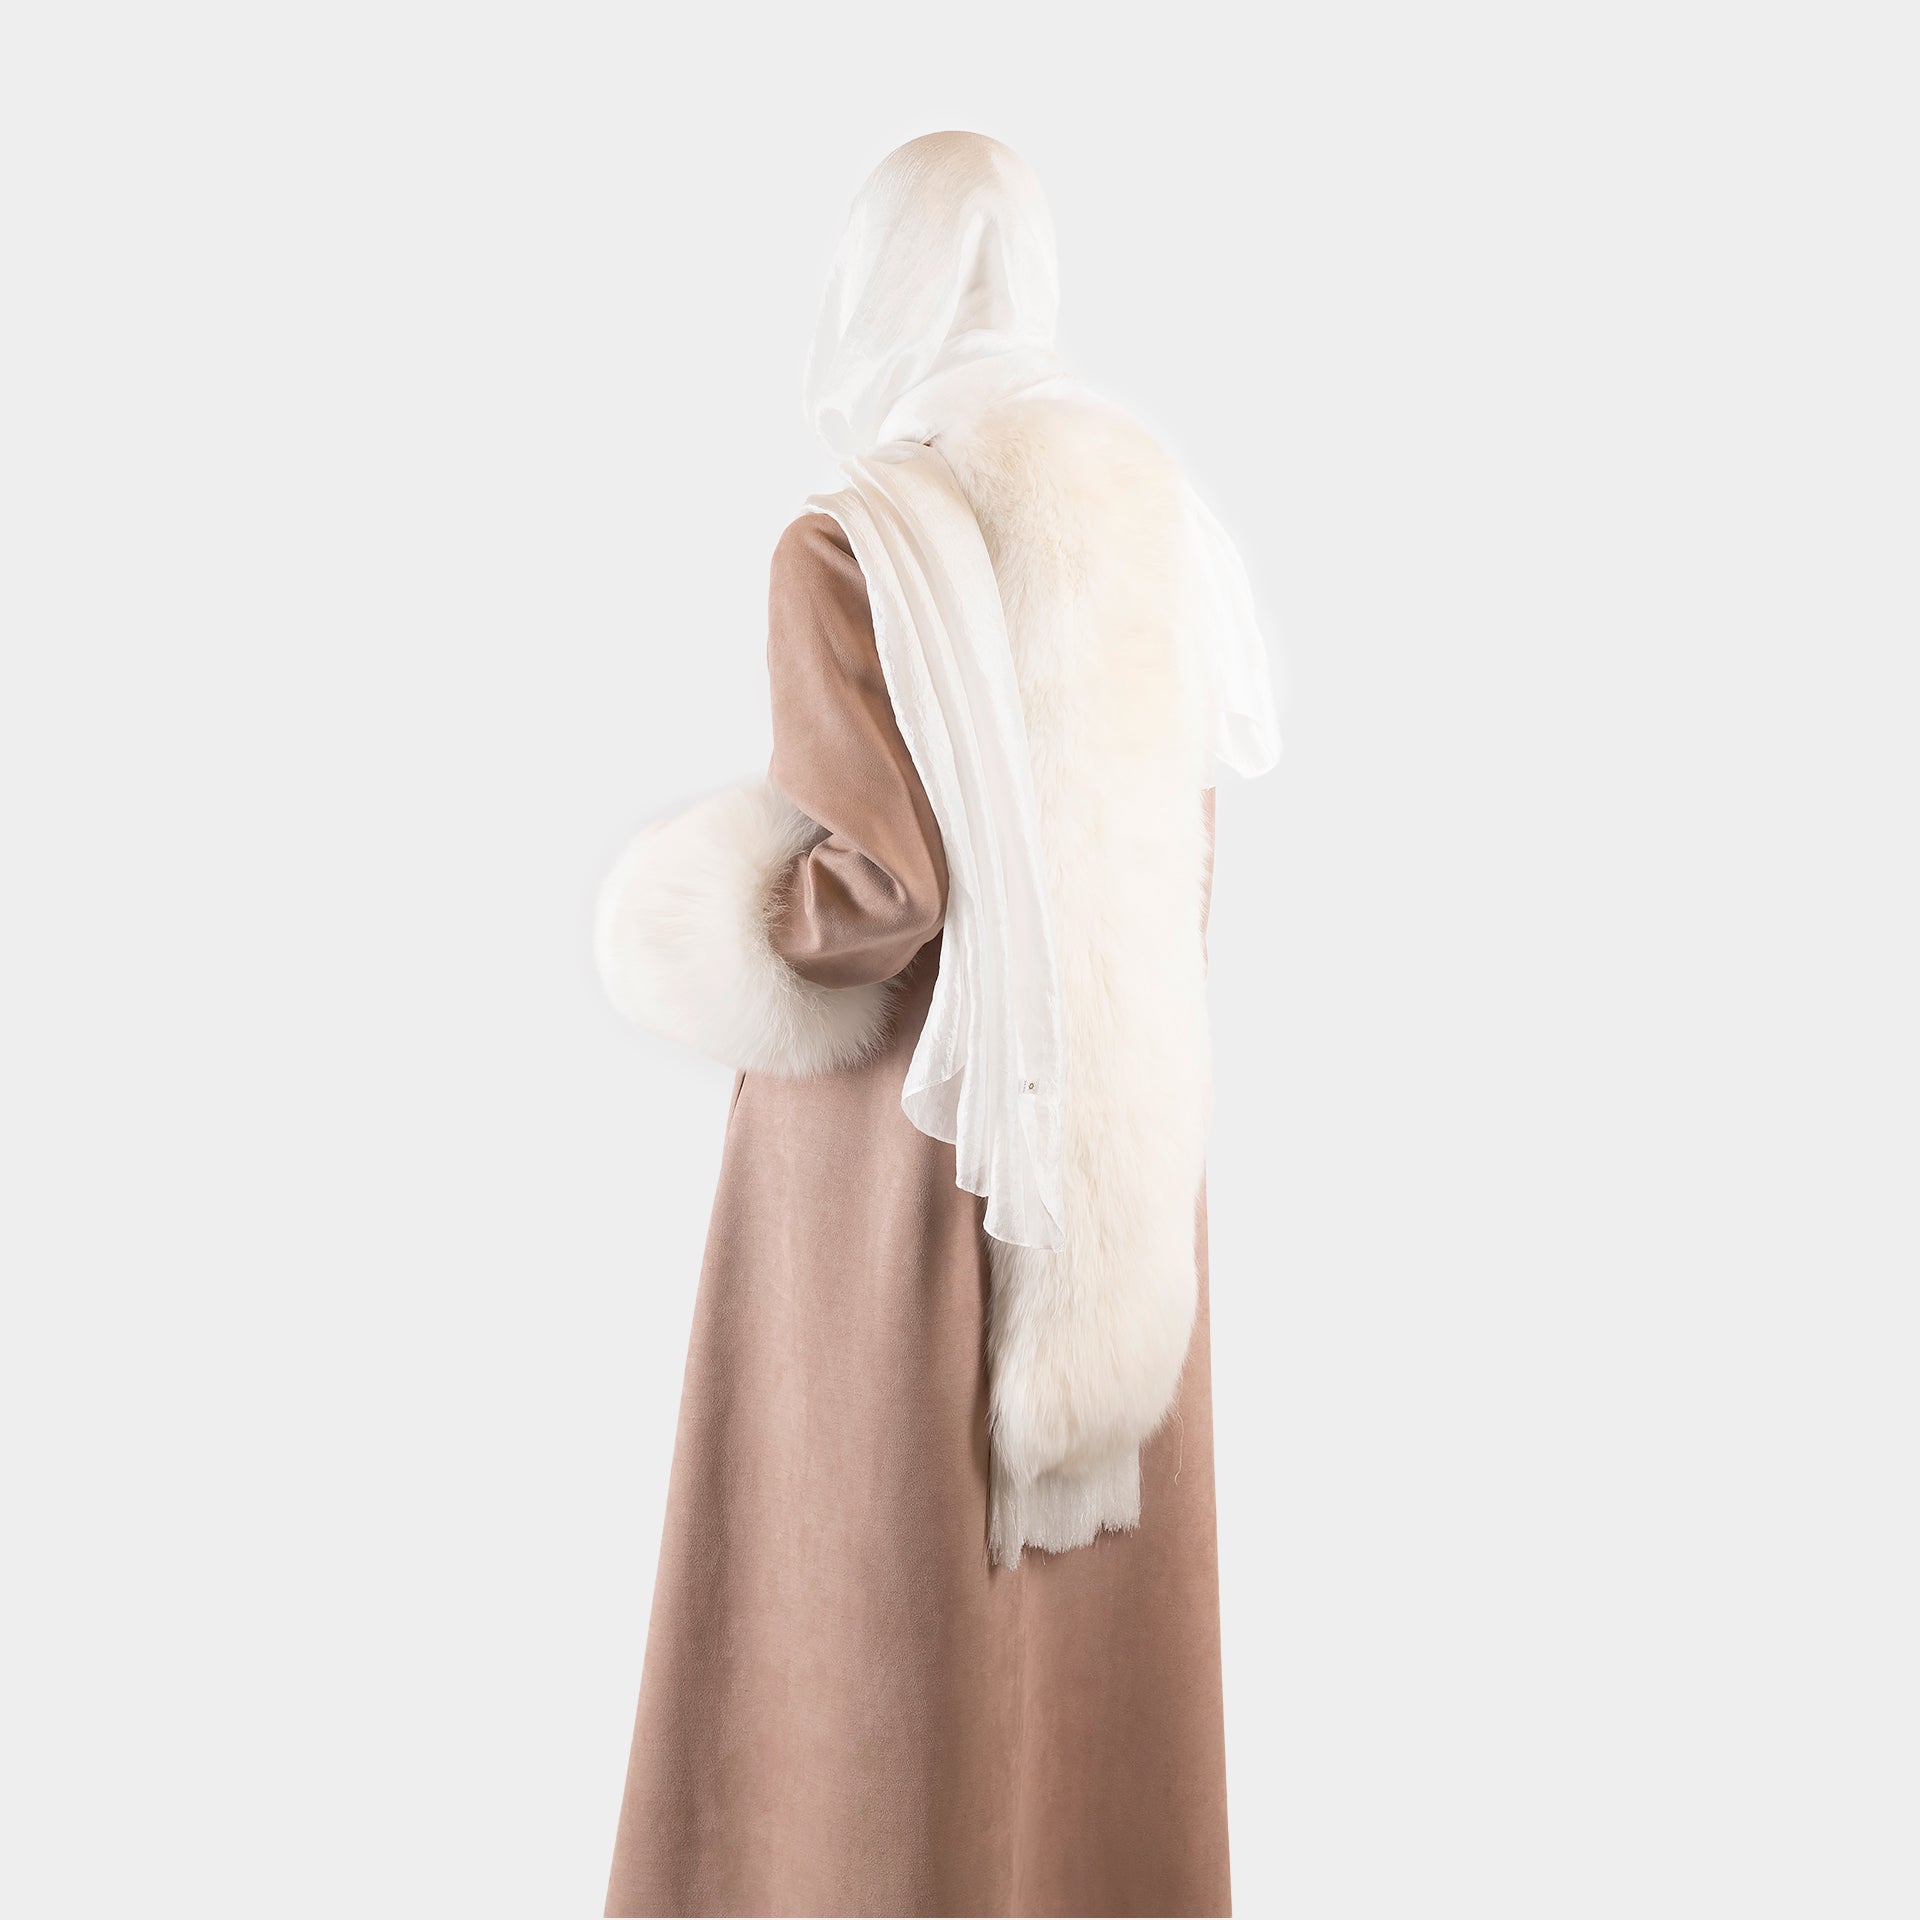 Beige Abaya With White Fur On the Sleeves End From Darzah